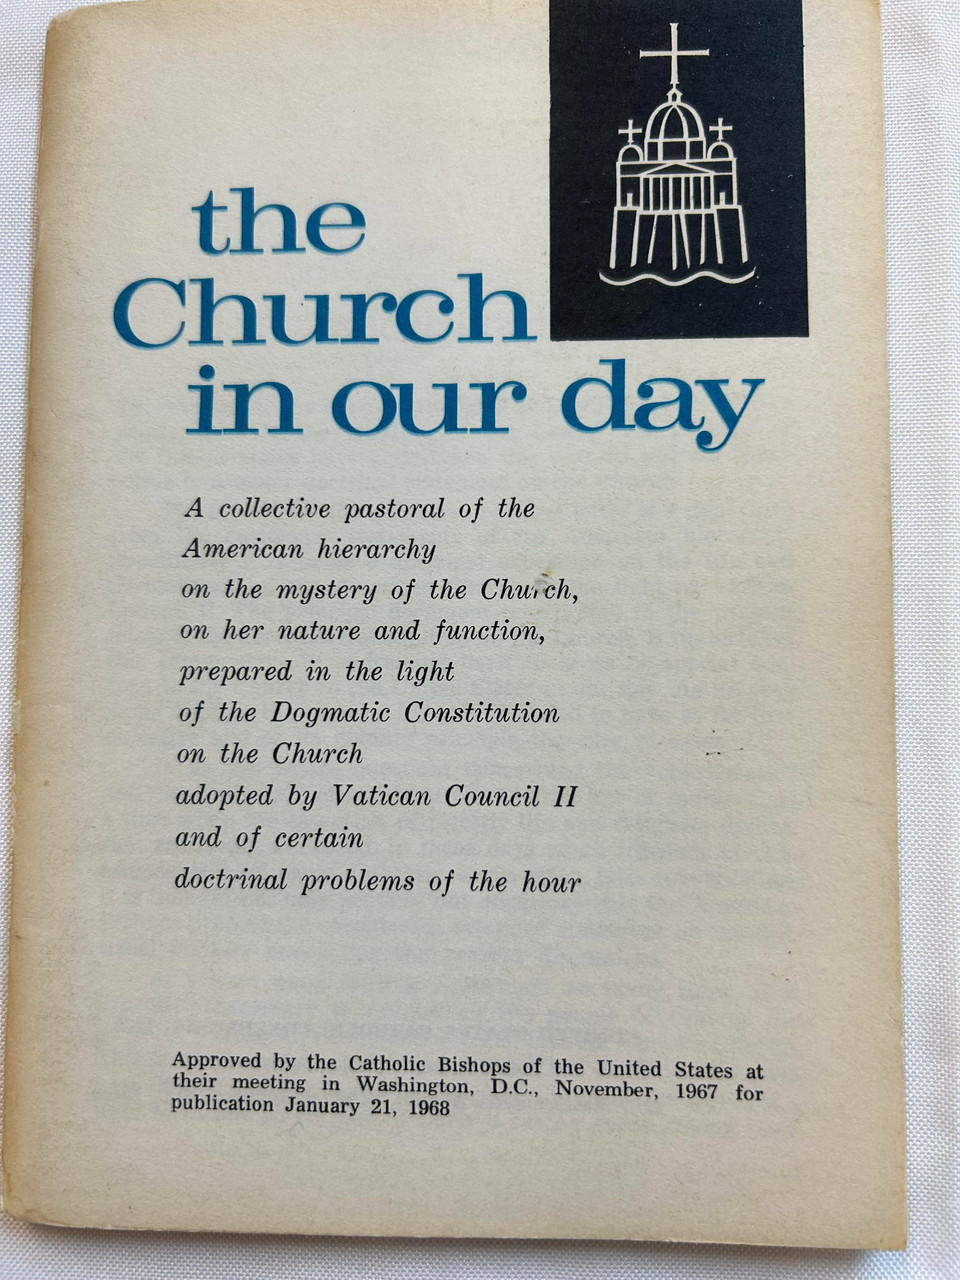 "A collective pastoral of the American hierarchy on the mystery of the Church, on her nature and function, prepared in the light of the Dogmatic Constitution on the Church adopted by Vatican Council II and of certain doctrinal problems of the hour."-Cover

This is a used book and is sold as is. It may contain markings and previous evidence of use.